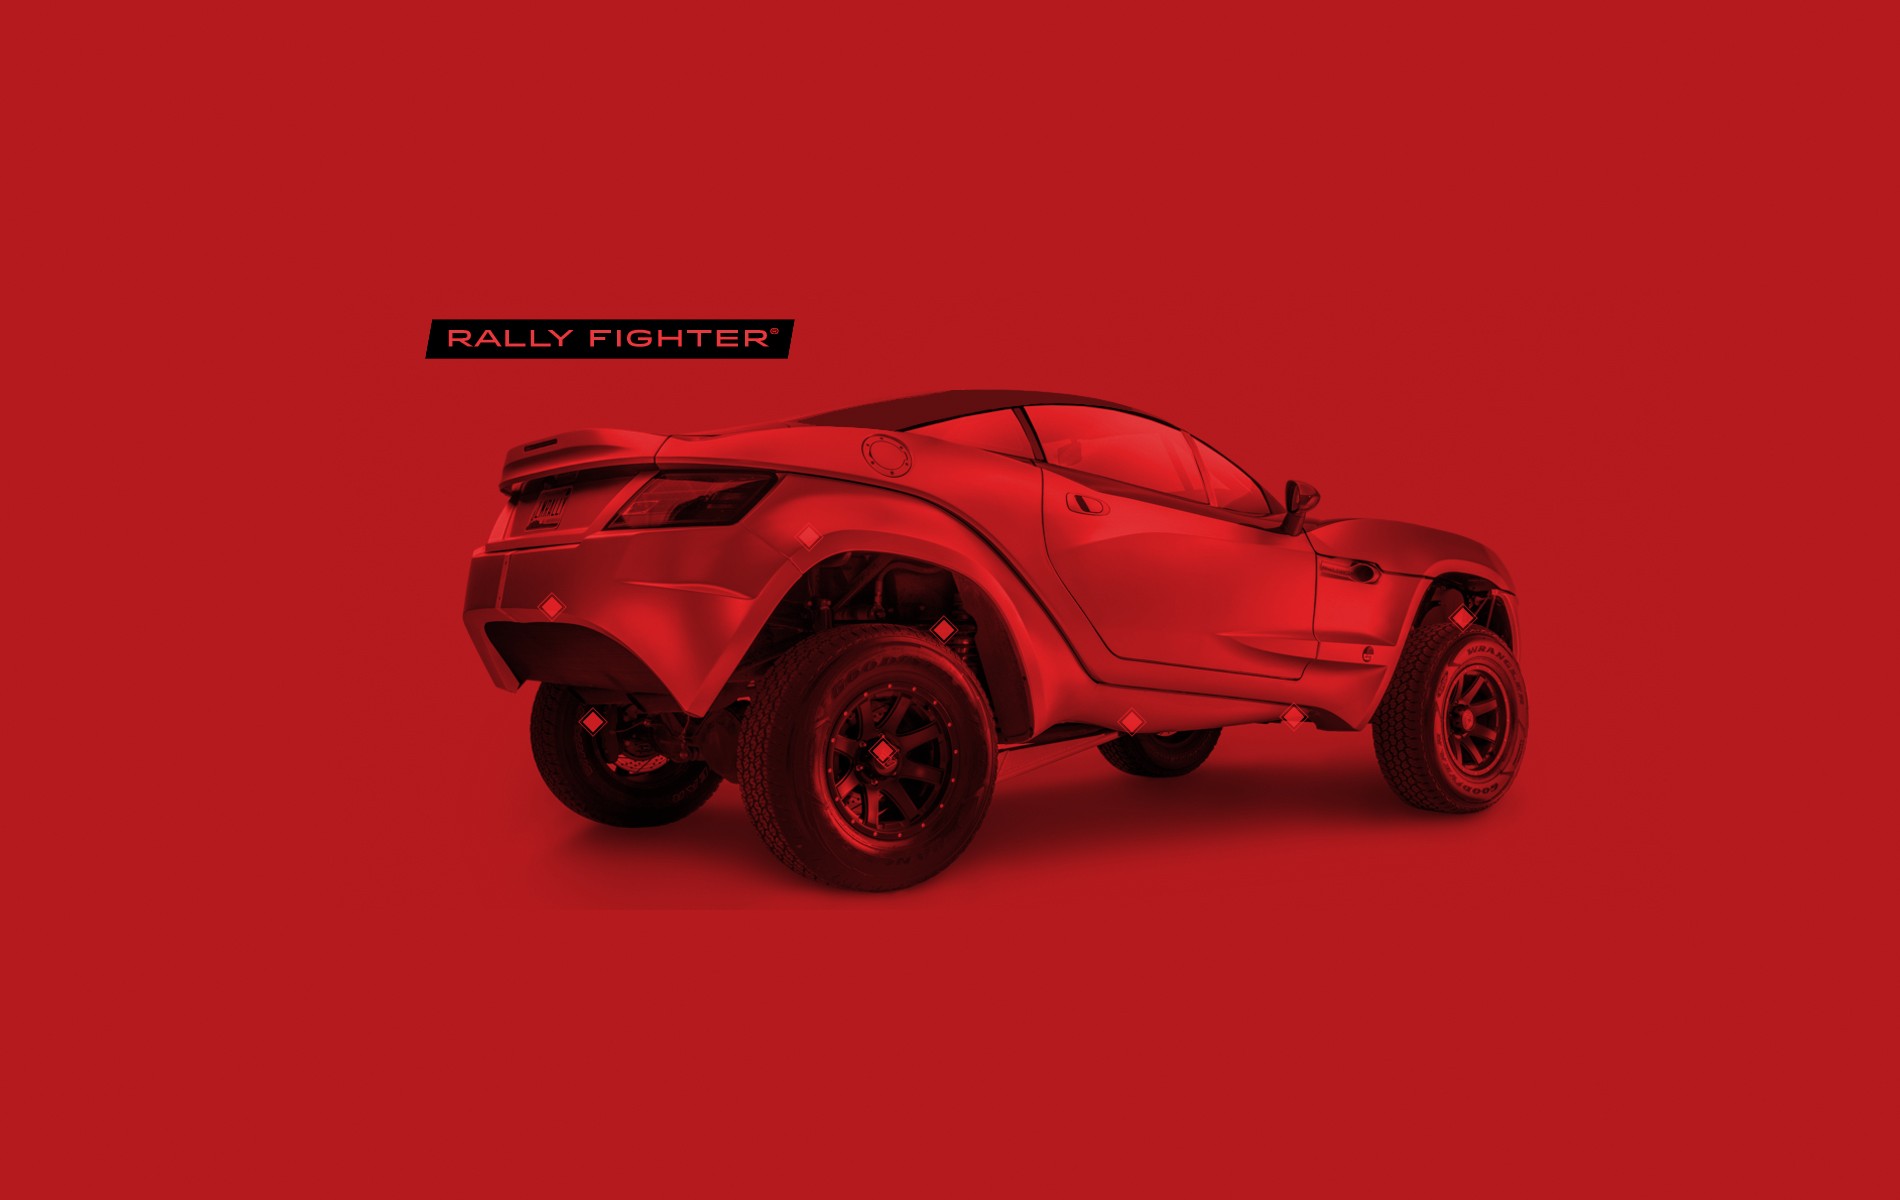 Concept Cars Vehicle Car Red Local Motors Local Motors Rally Fighter 1900x1200